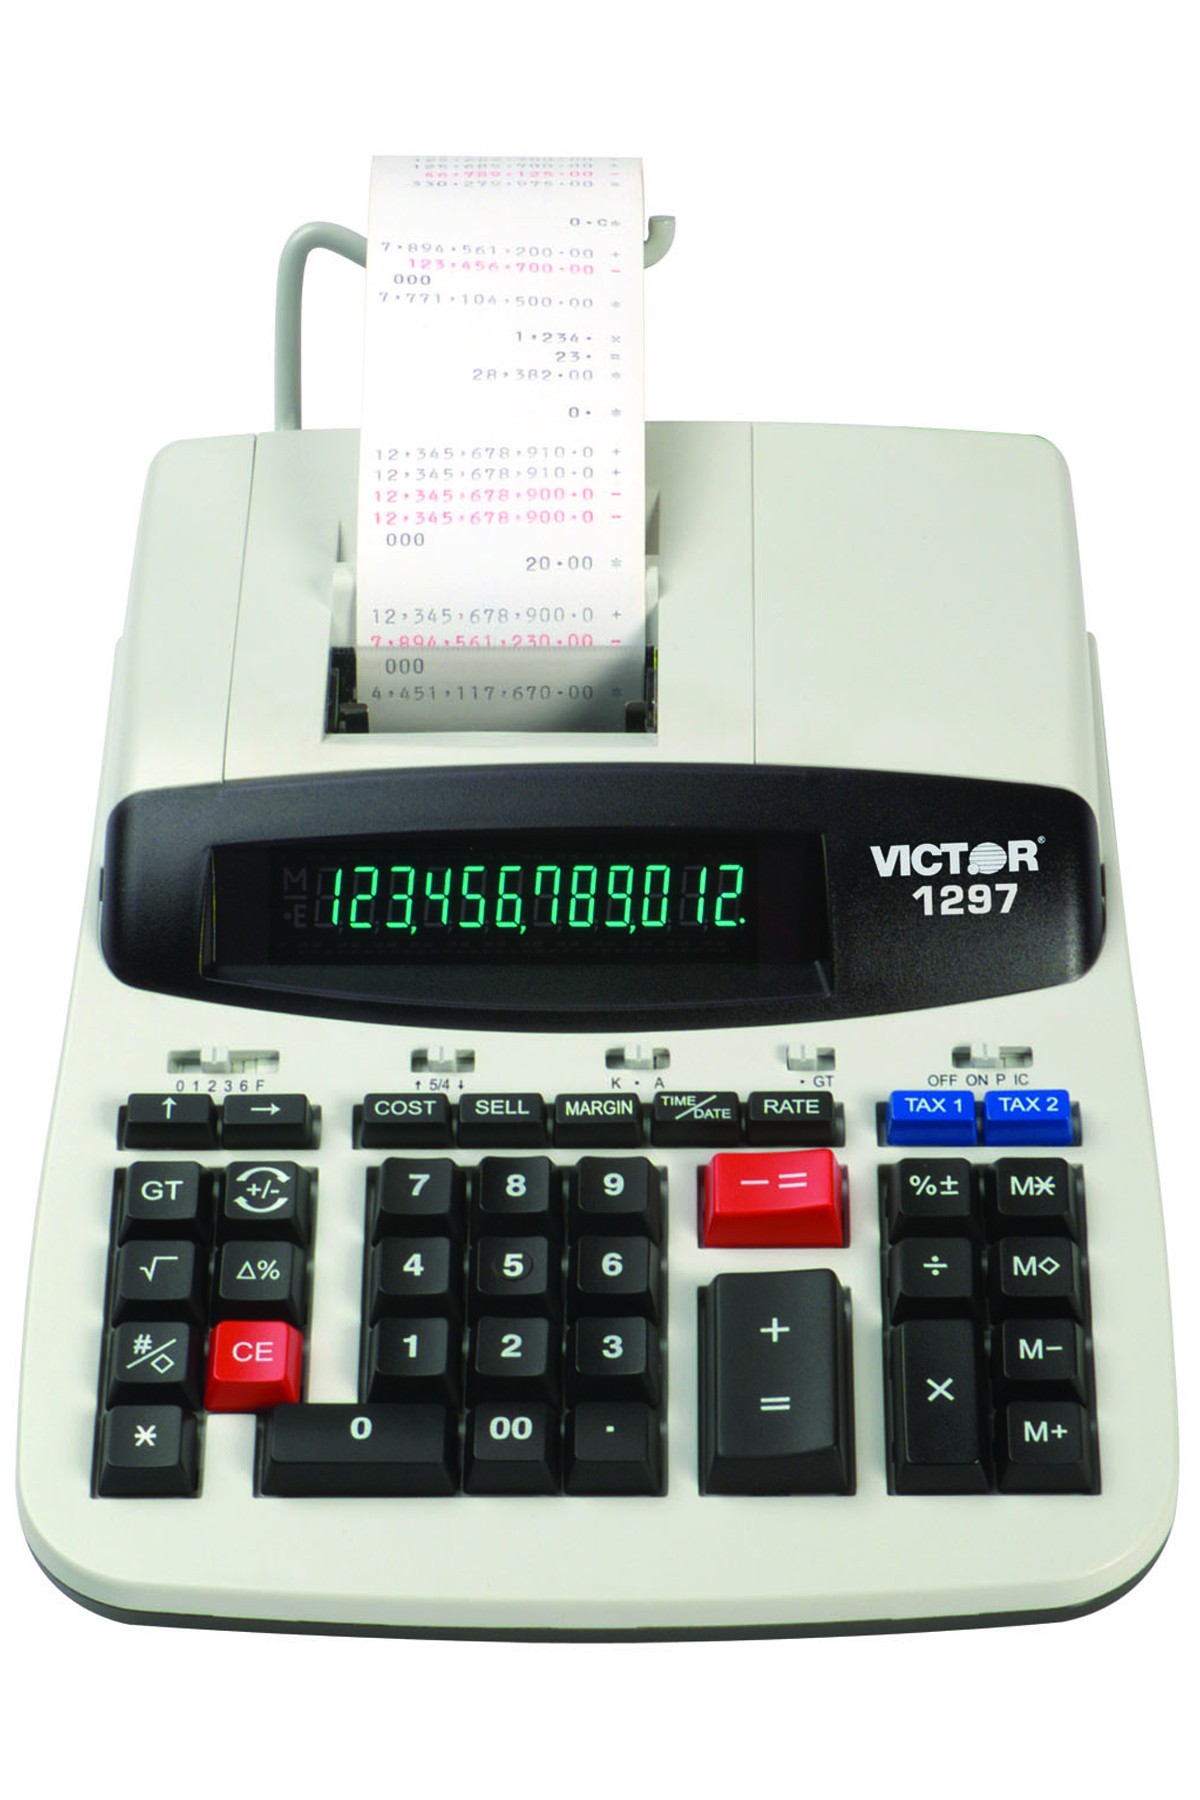 Victor 1297 12 Digit Commercial Printing Calculator Dual Color Print  lps Big Display 12 Digits LCD AC Supply Powered 3